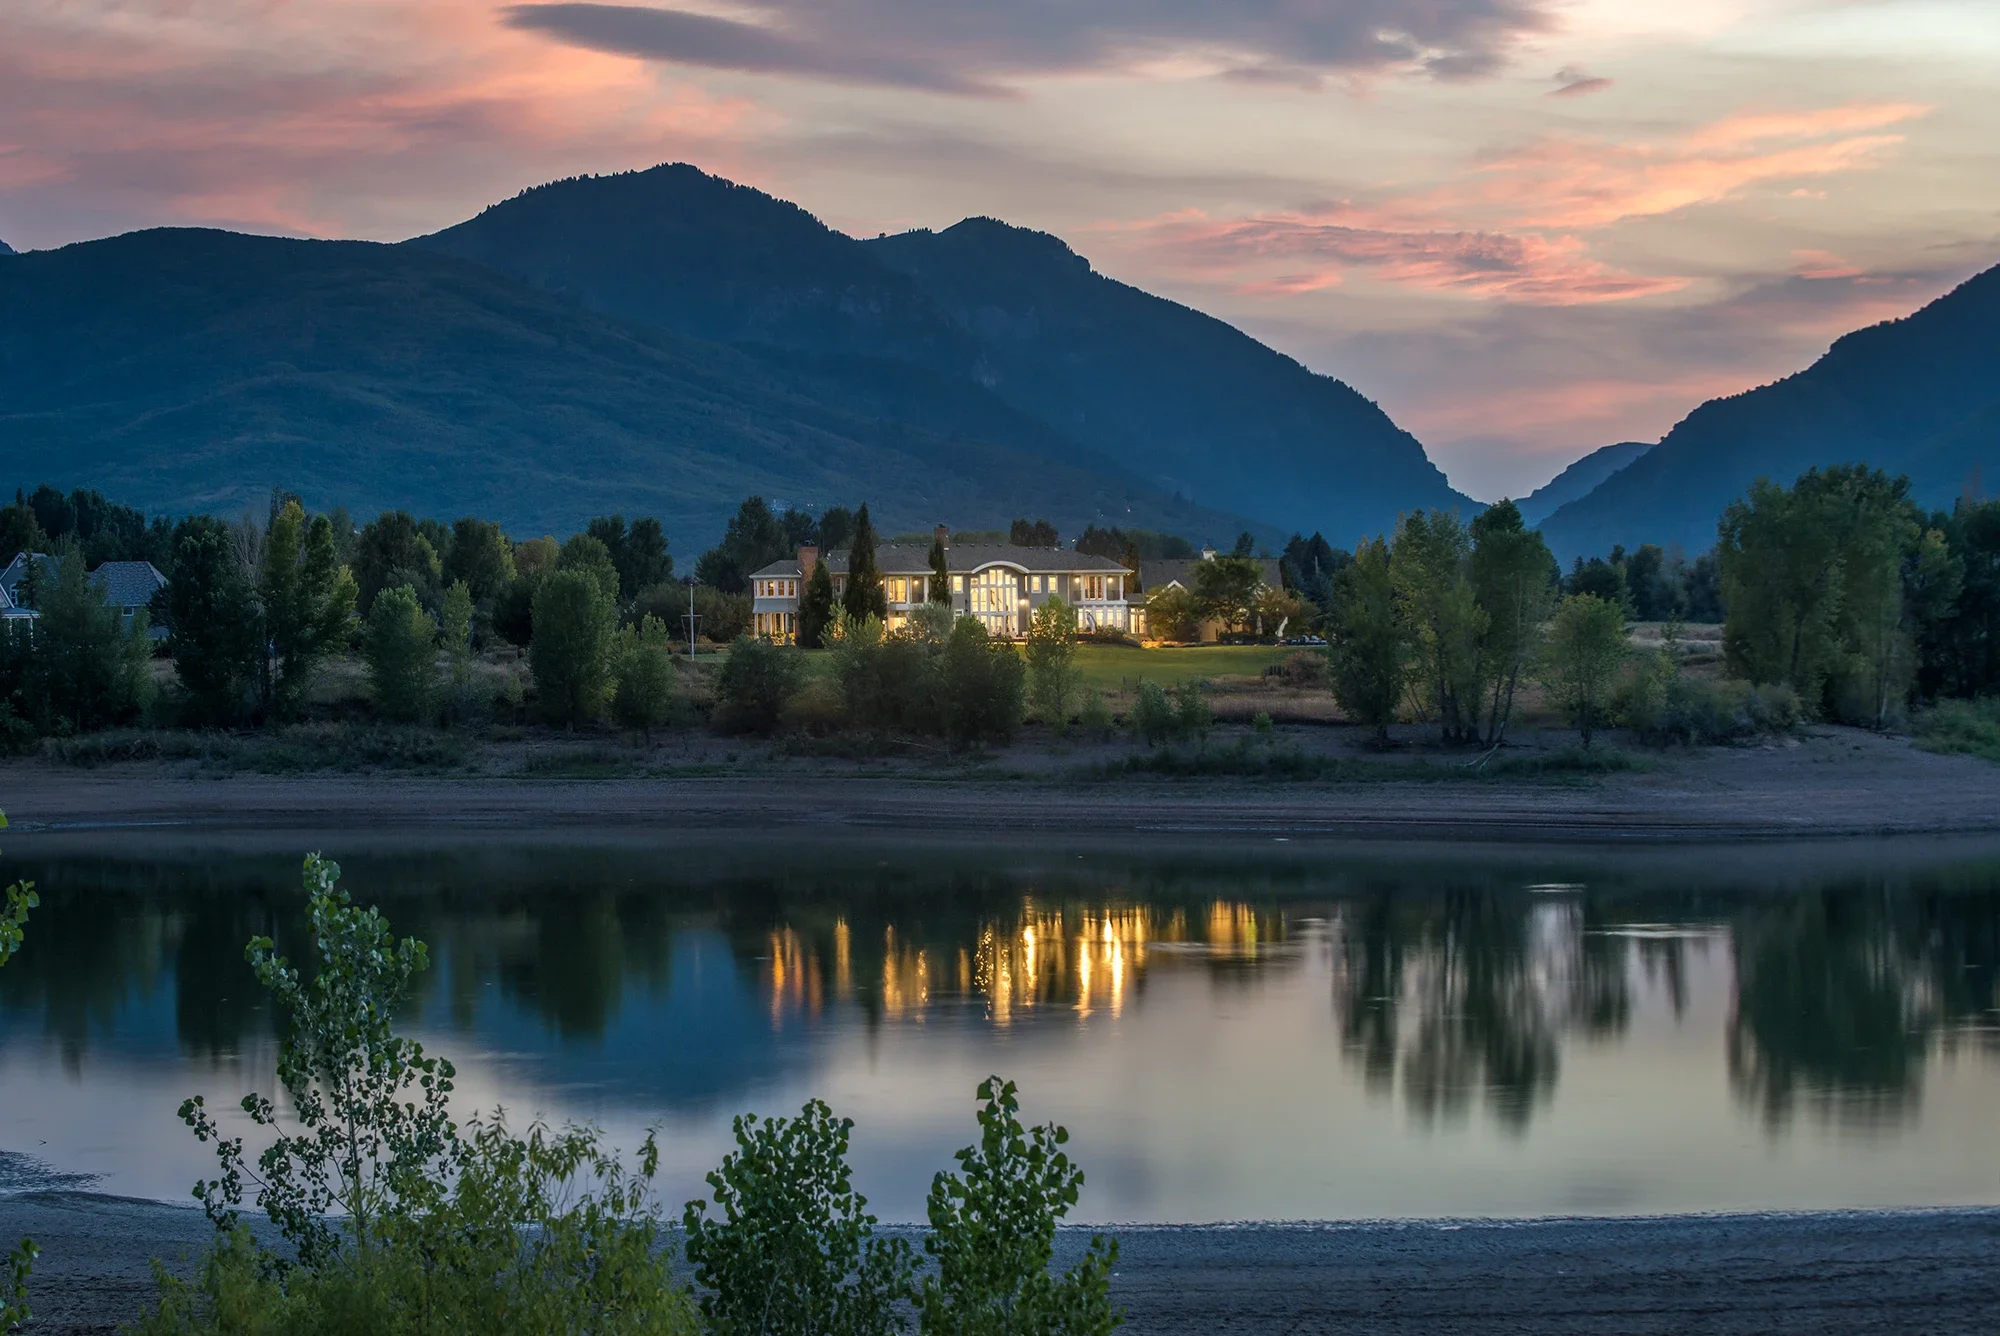 A lakefront home basks in the glow of the sunset on Pineview Reservoir.